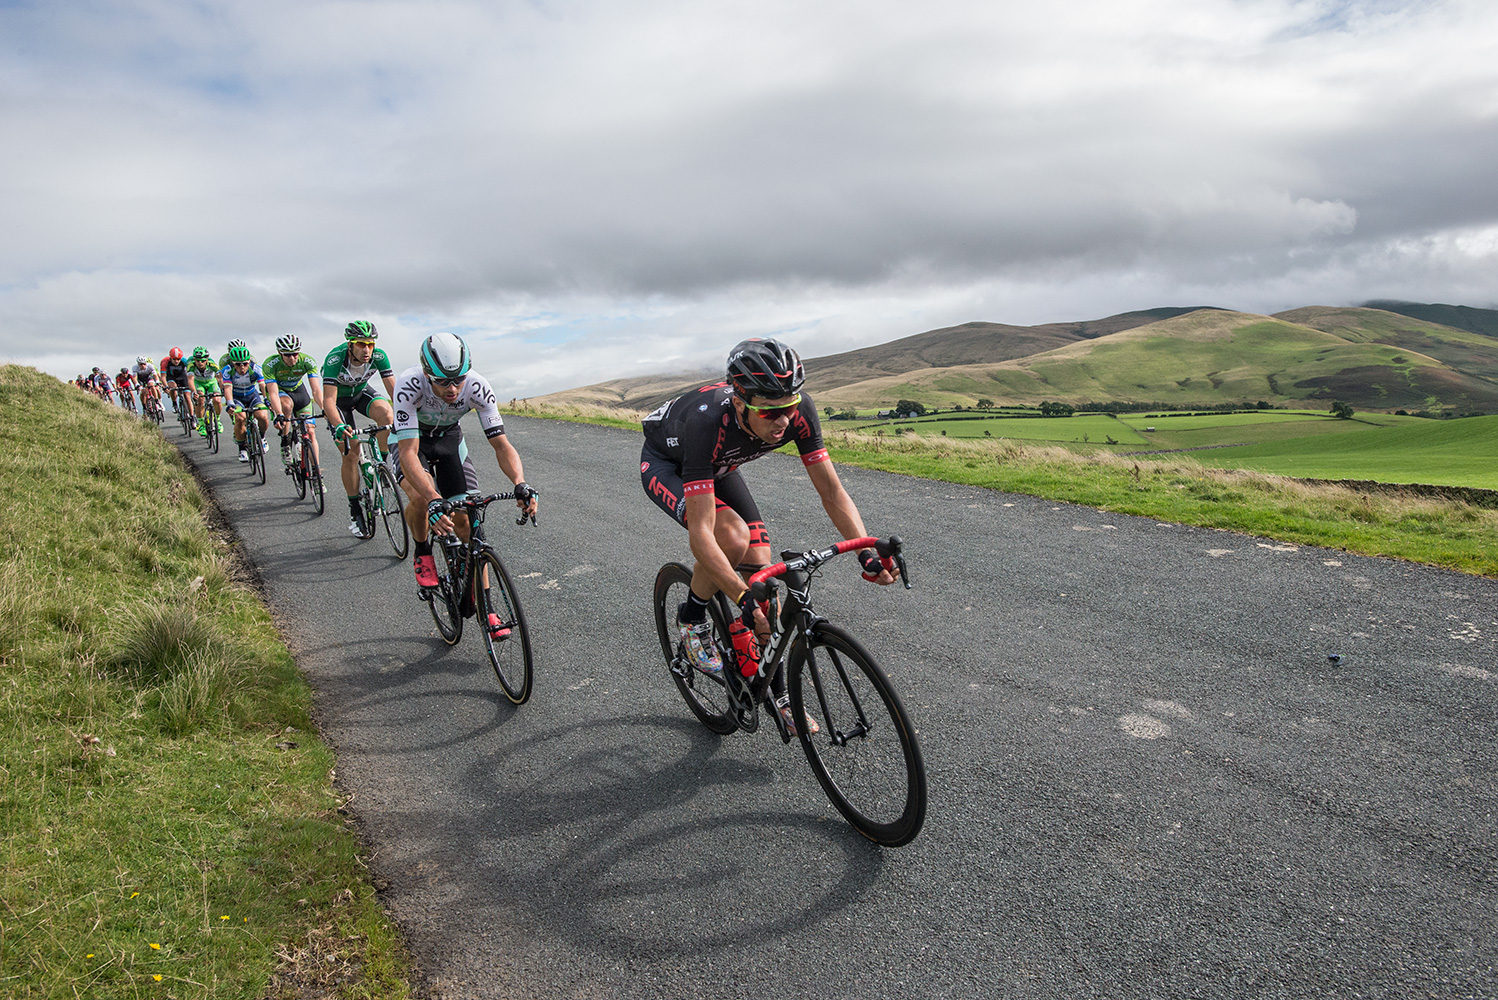 The descent from Caldbeck Commons into Uldale in Cumbria on Stage 2